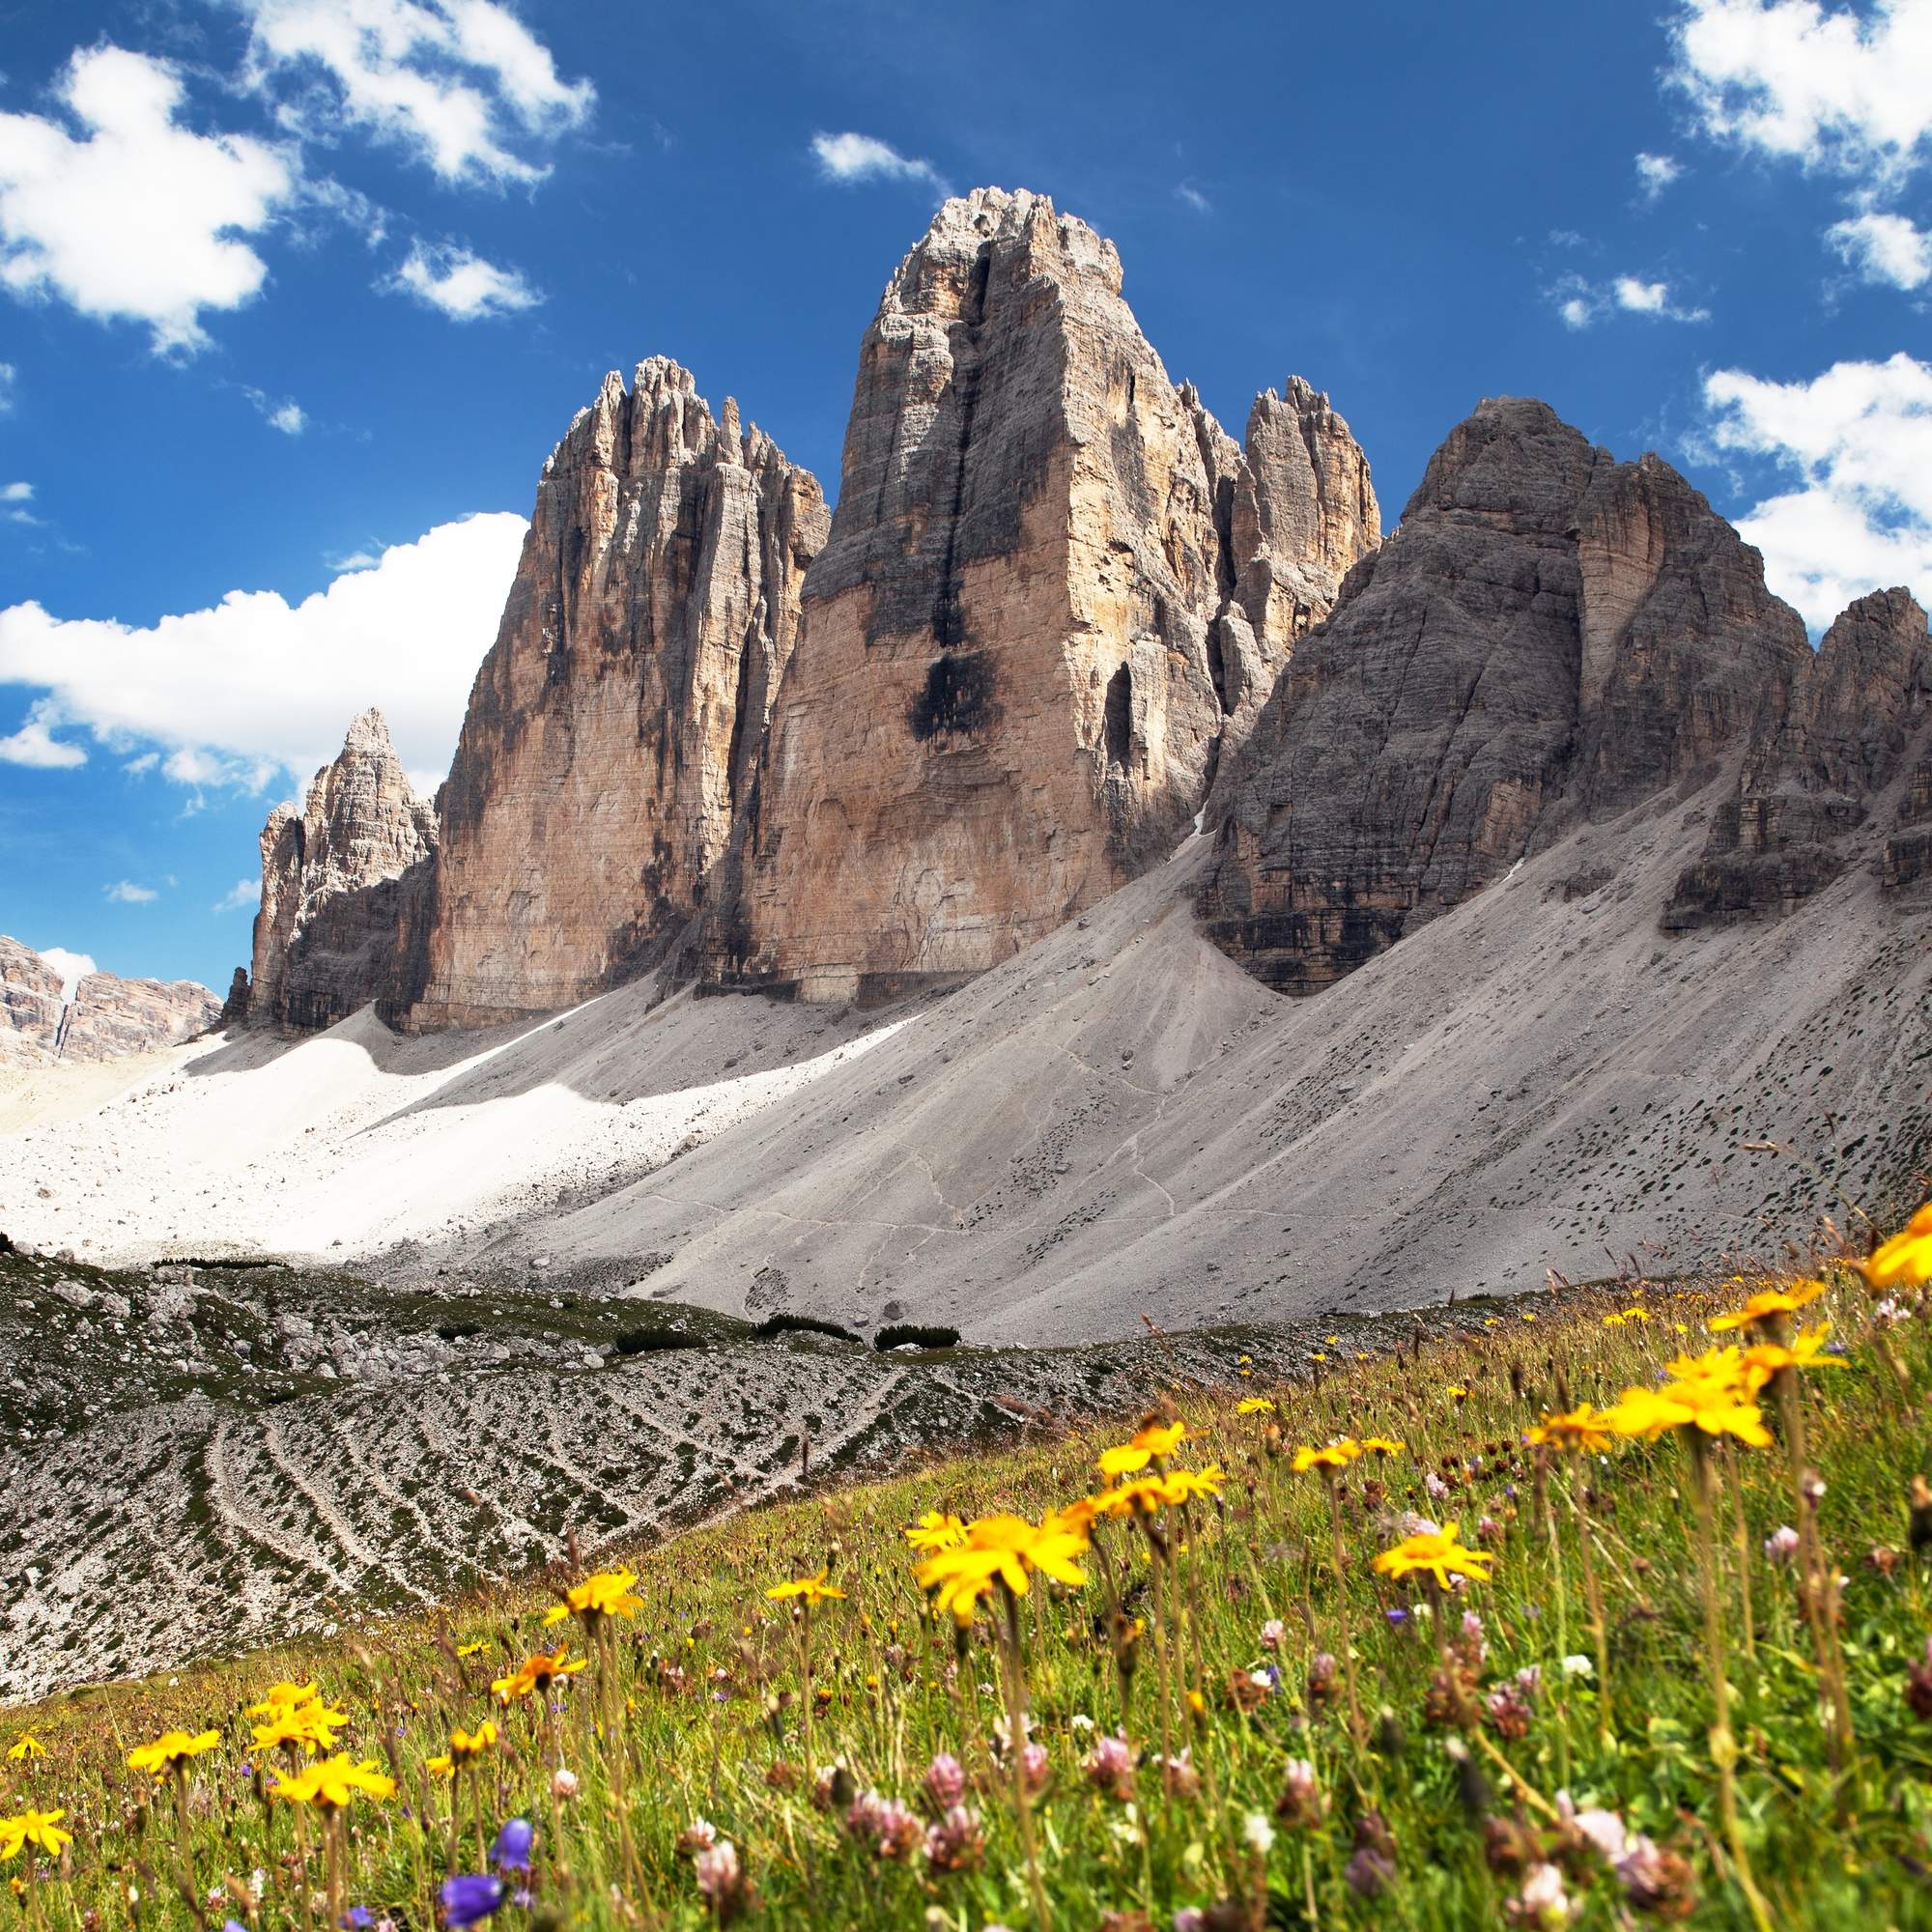 The Most Beautiful Mountains in the World | Italy and Travel nation